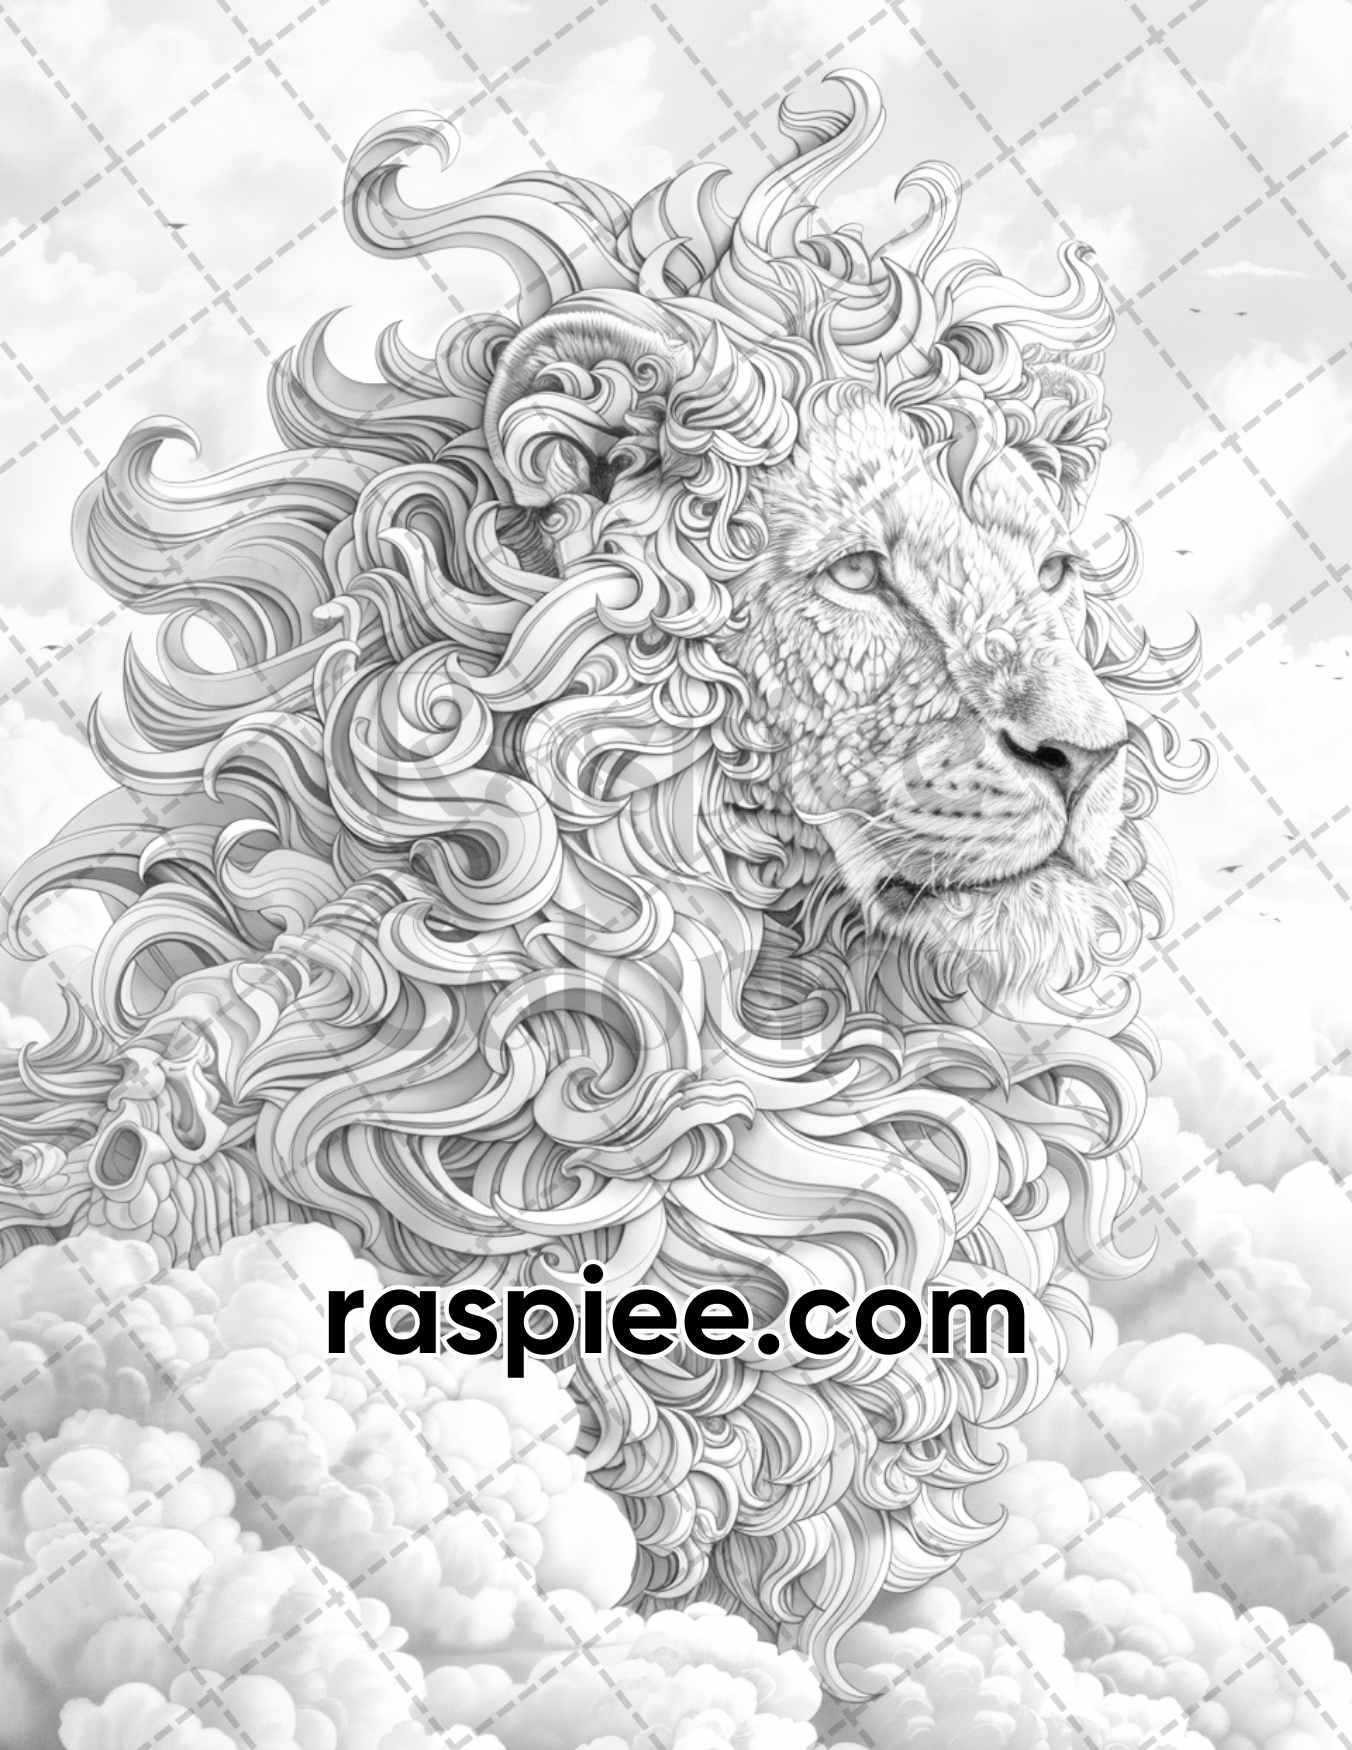 adult coloring pages, adult coloring sheets, adult coloring book pdf, adult coloring book printable, grayscale coloring pages, grayscale coloring books, animal coloring pages for adults, animal coloring book, grayscale illustration, fantasy coloring pages, fantasy coloring book